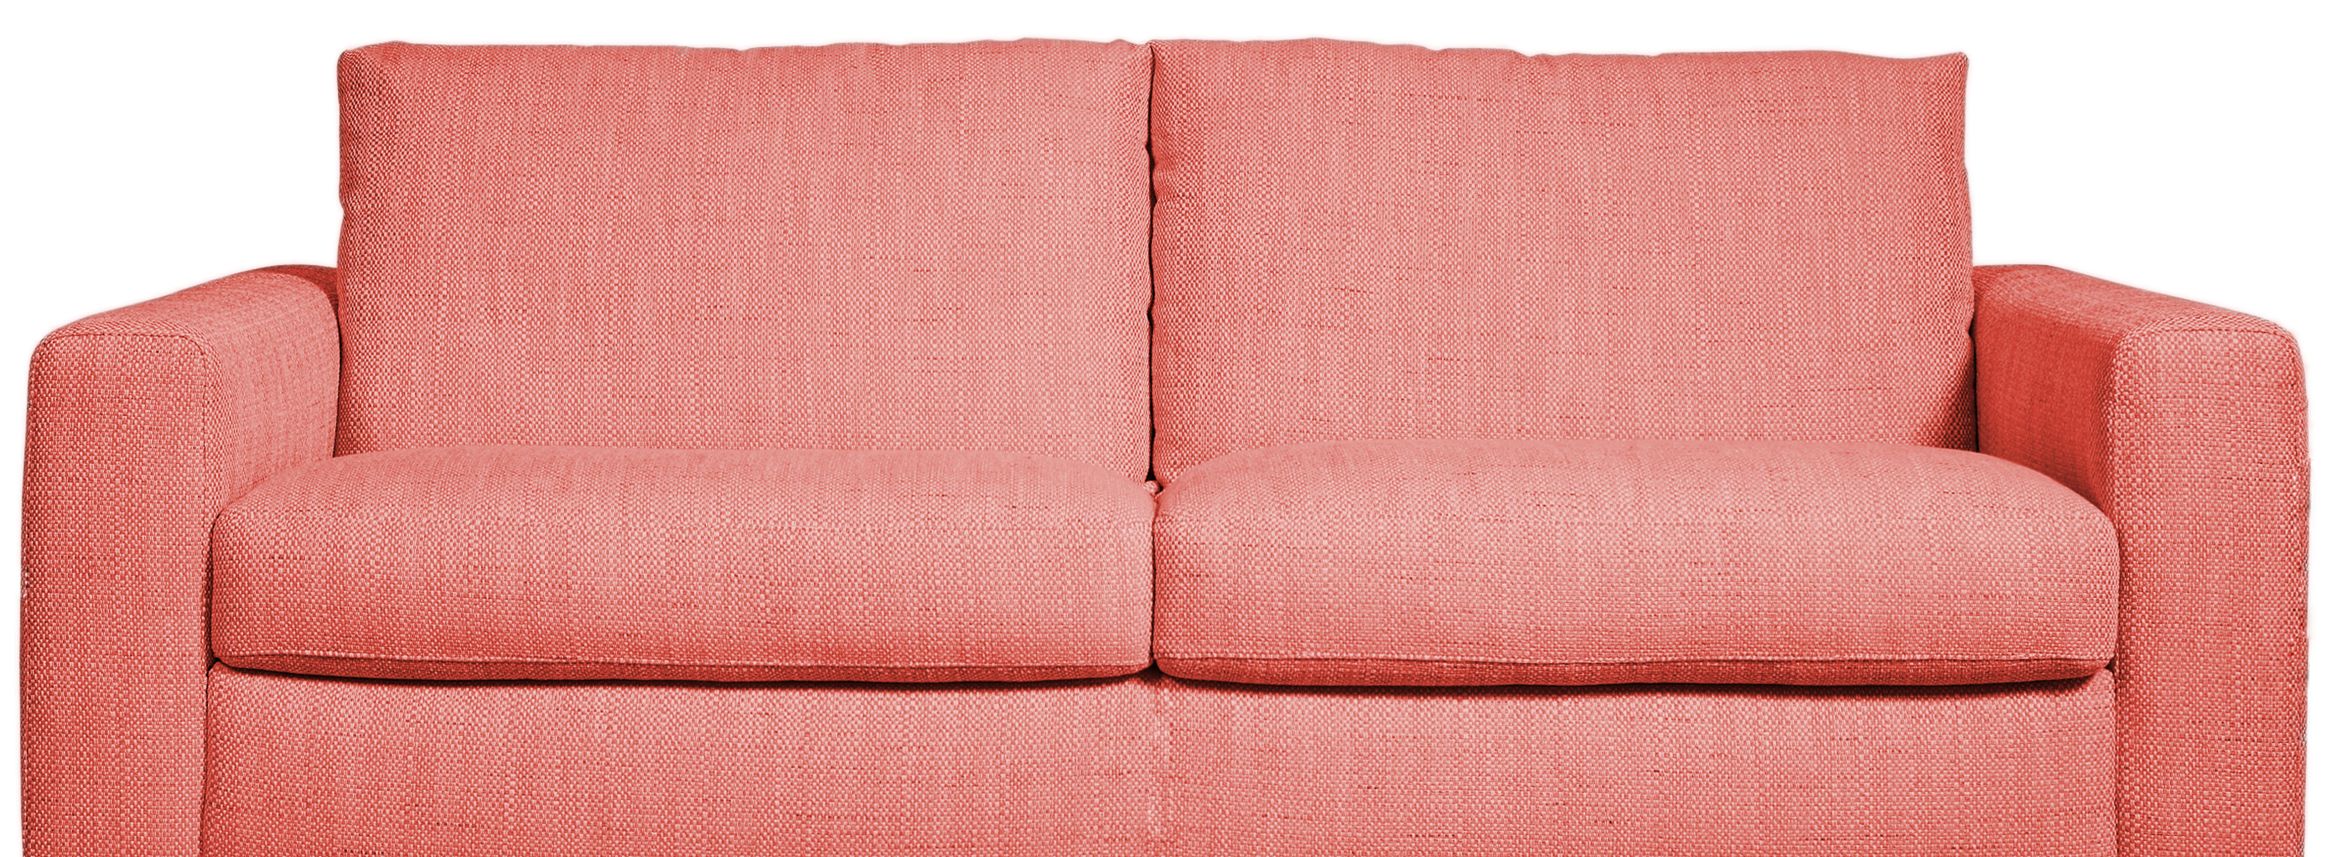 How To Make A Sofa Bed More Comfortable